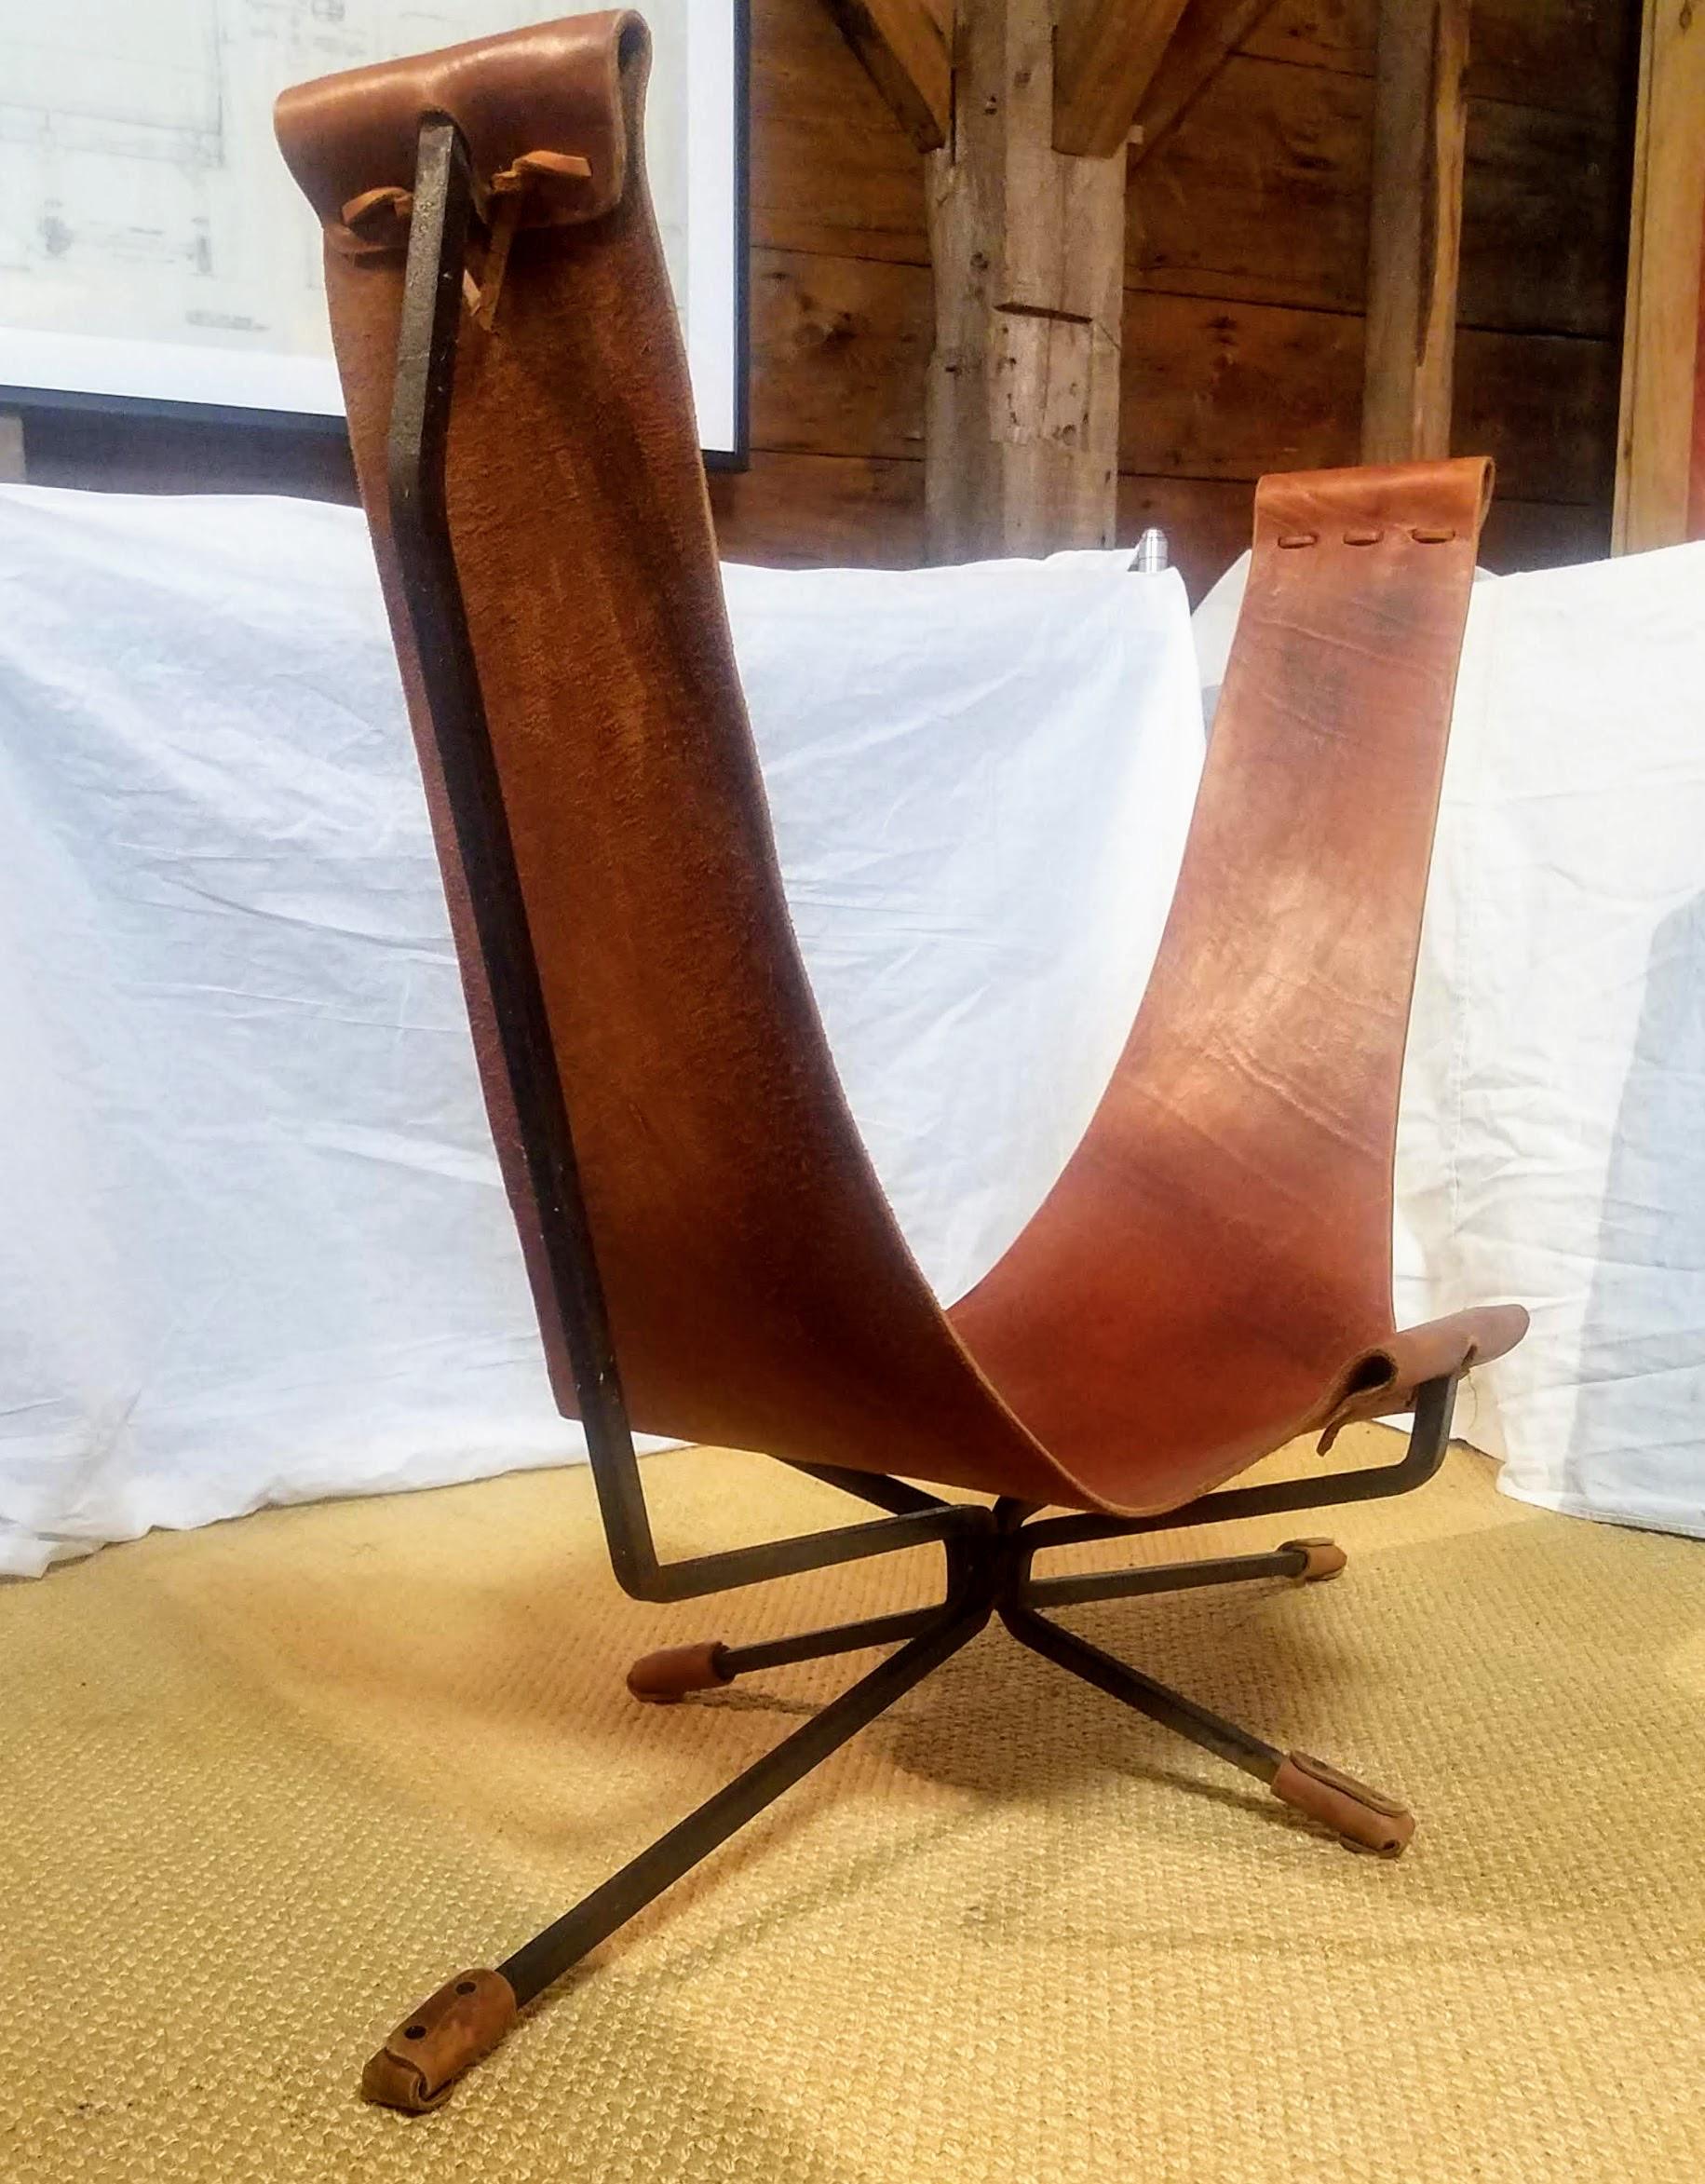 A Loveseat by Daniel Wenger created in 1972 with a replaced sling. This is an early example of this iconic Californian chair.
The background on this chair was described to me by Daniel Wenger:
